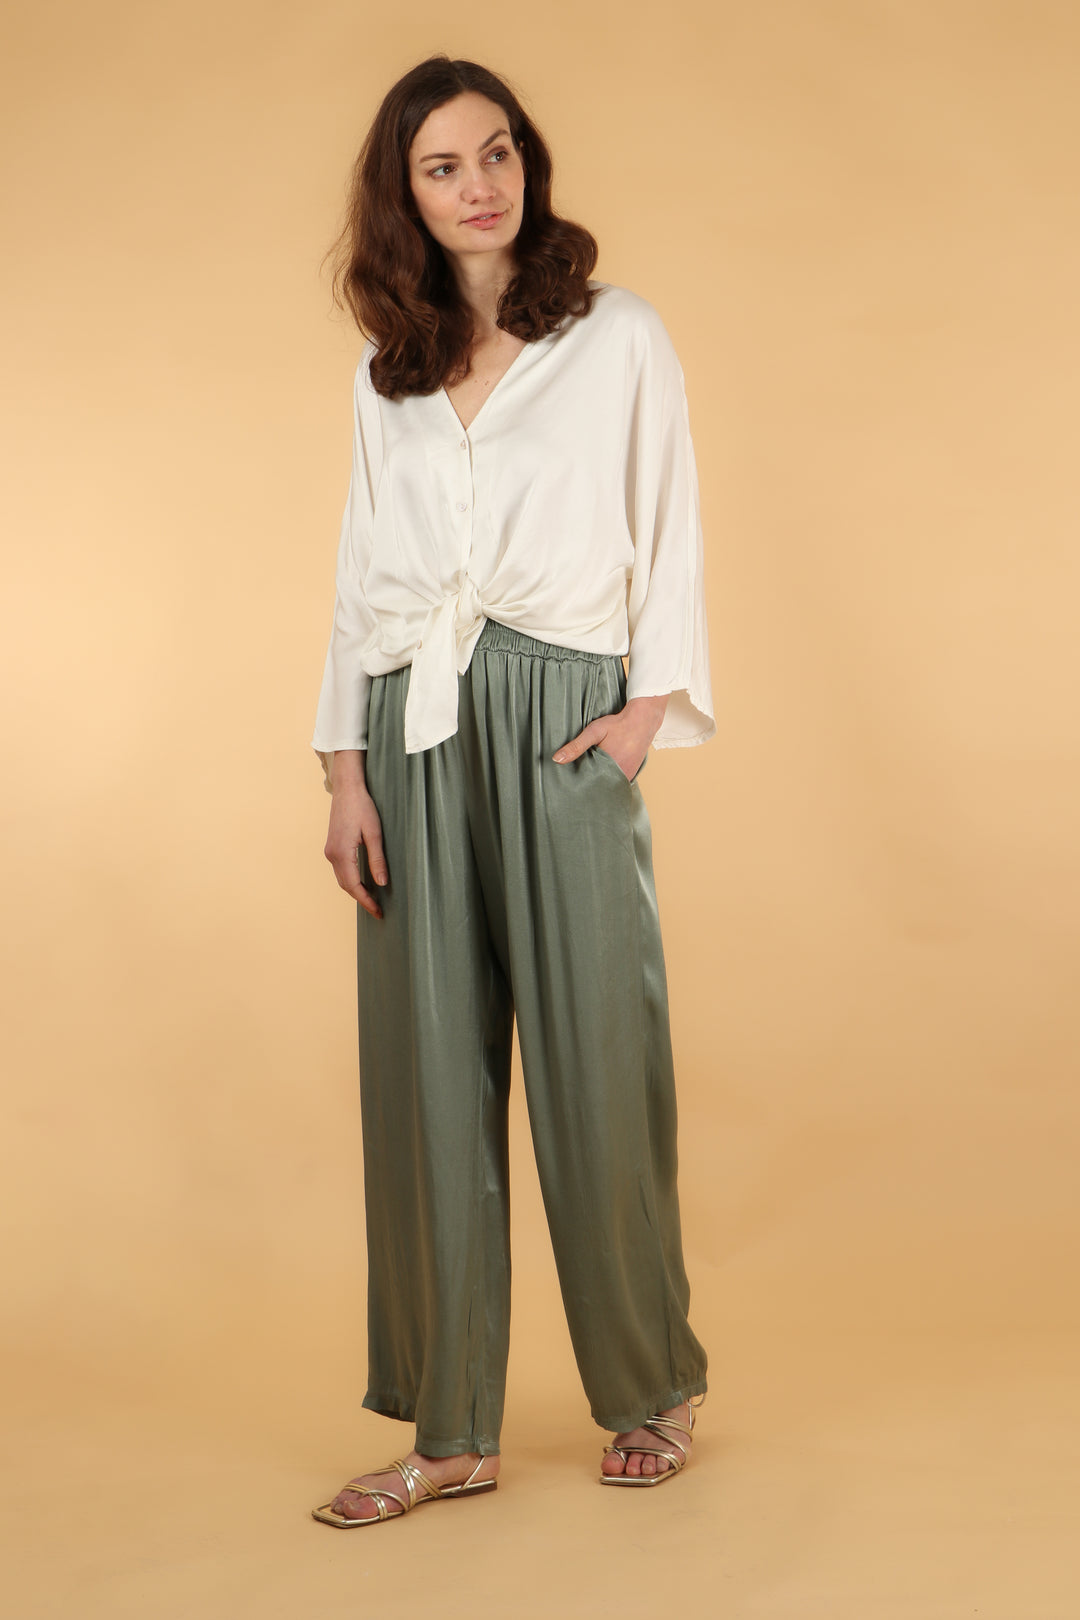 model showing that the long wide leg trousers have pockets for convenience